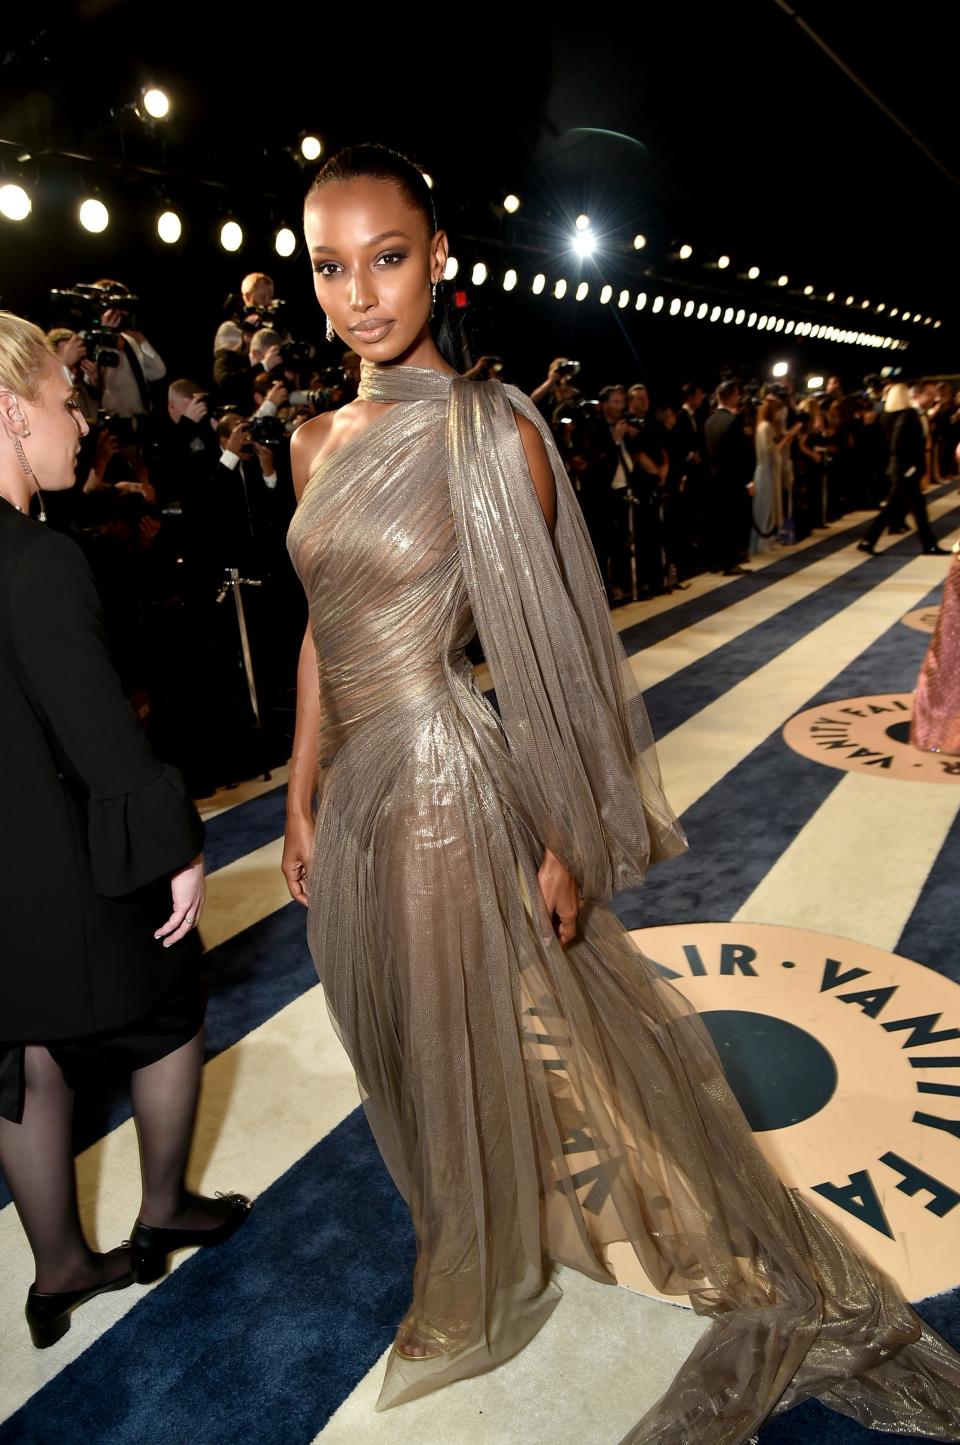 <p>WHO: Jasmine Tookes</p> <p>WHAT: Jean-Louis Sabaji, John Hardy jewelry</p> <p>WHERE: At the <em>Vanity Fair</em> Oscars party, Los Angeles</p> <p>WHEN: March 4, 2018</p>